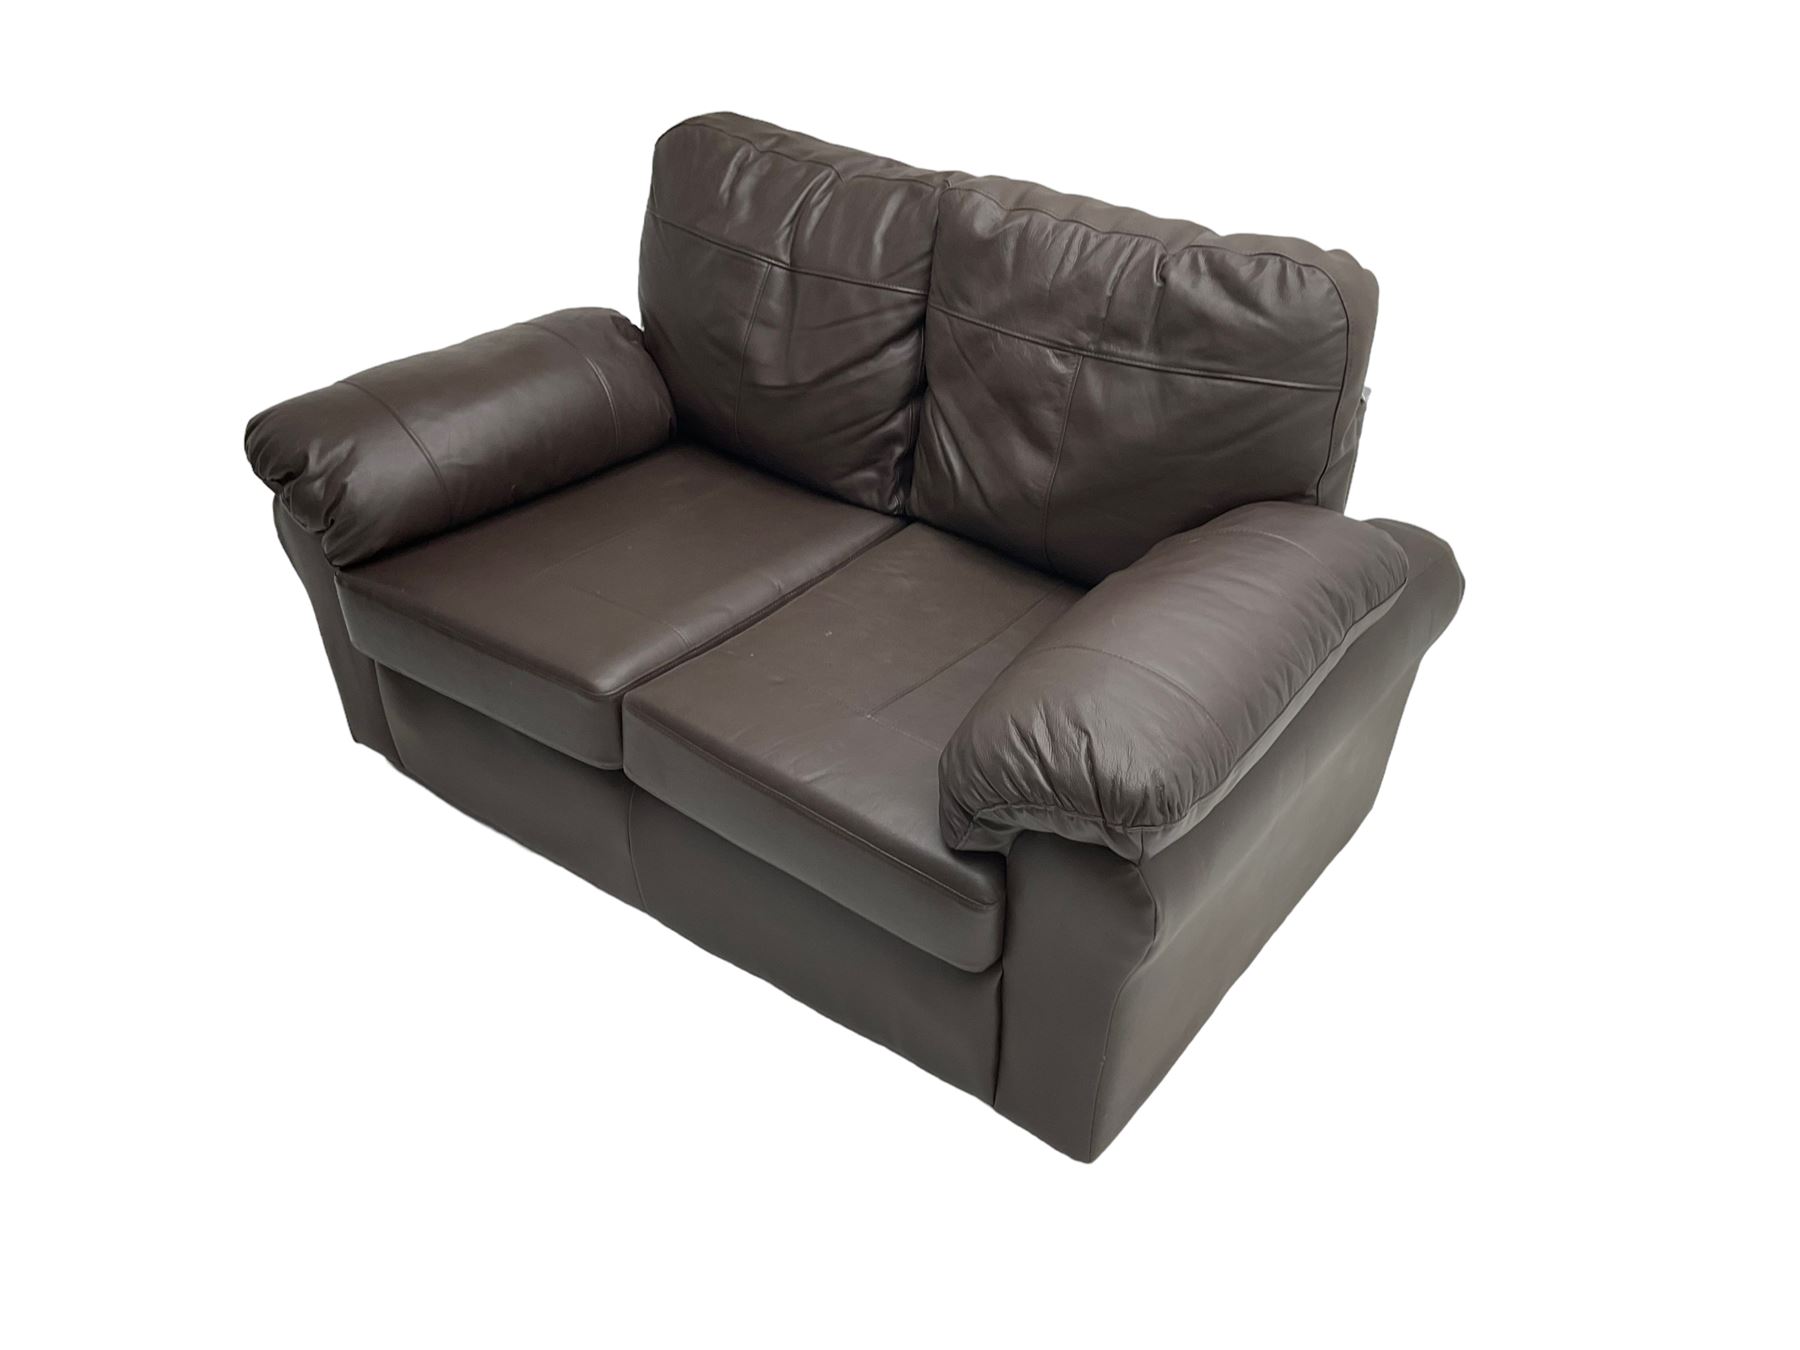 Two seat sofa - Image 6 of 7